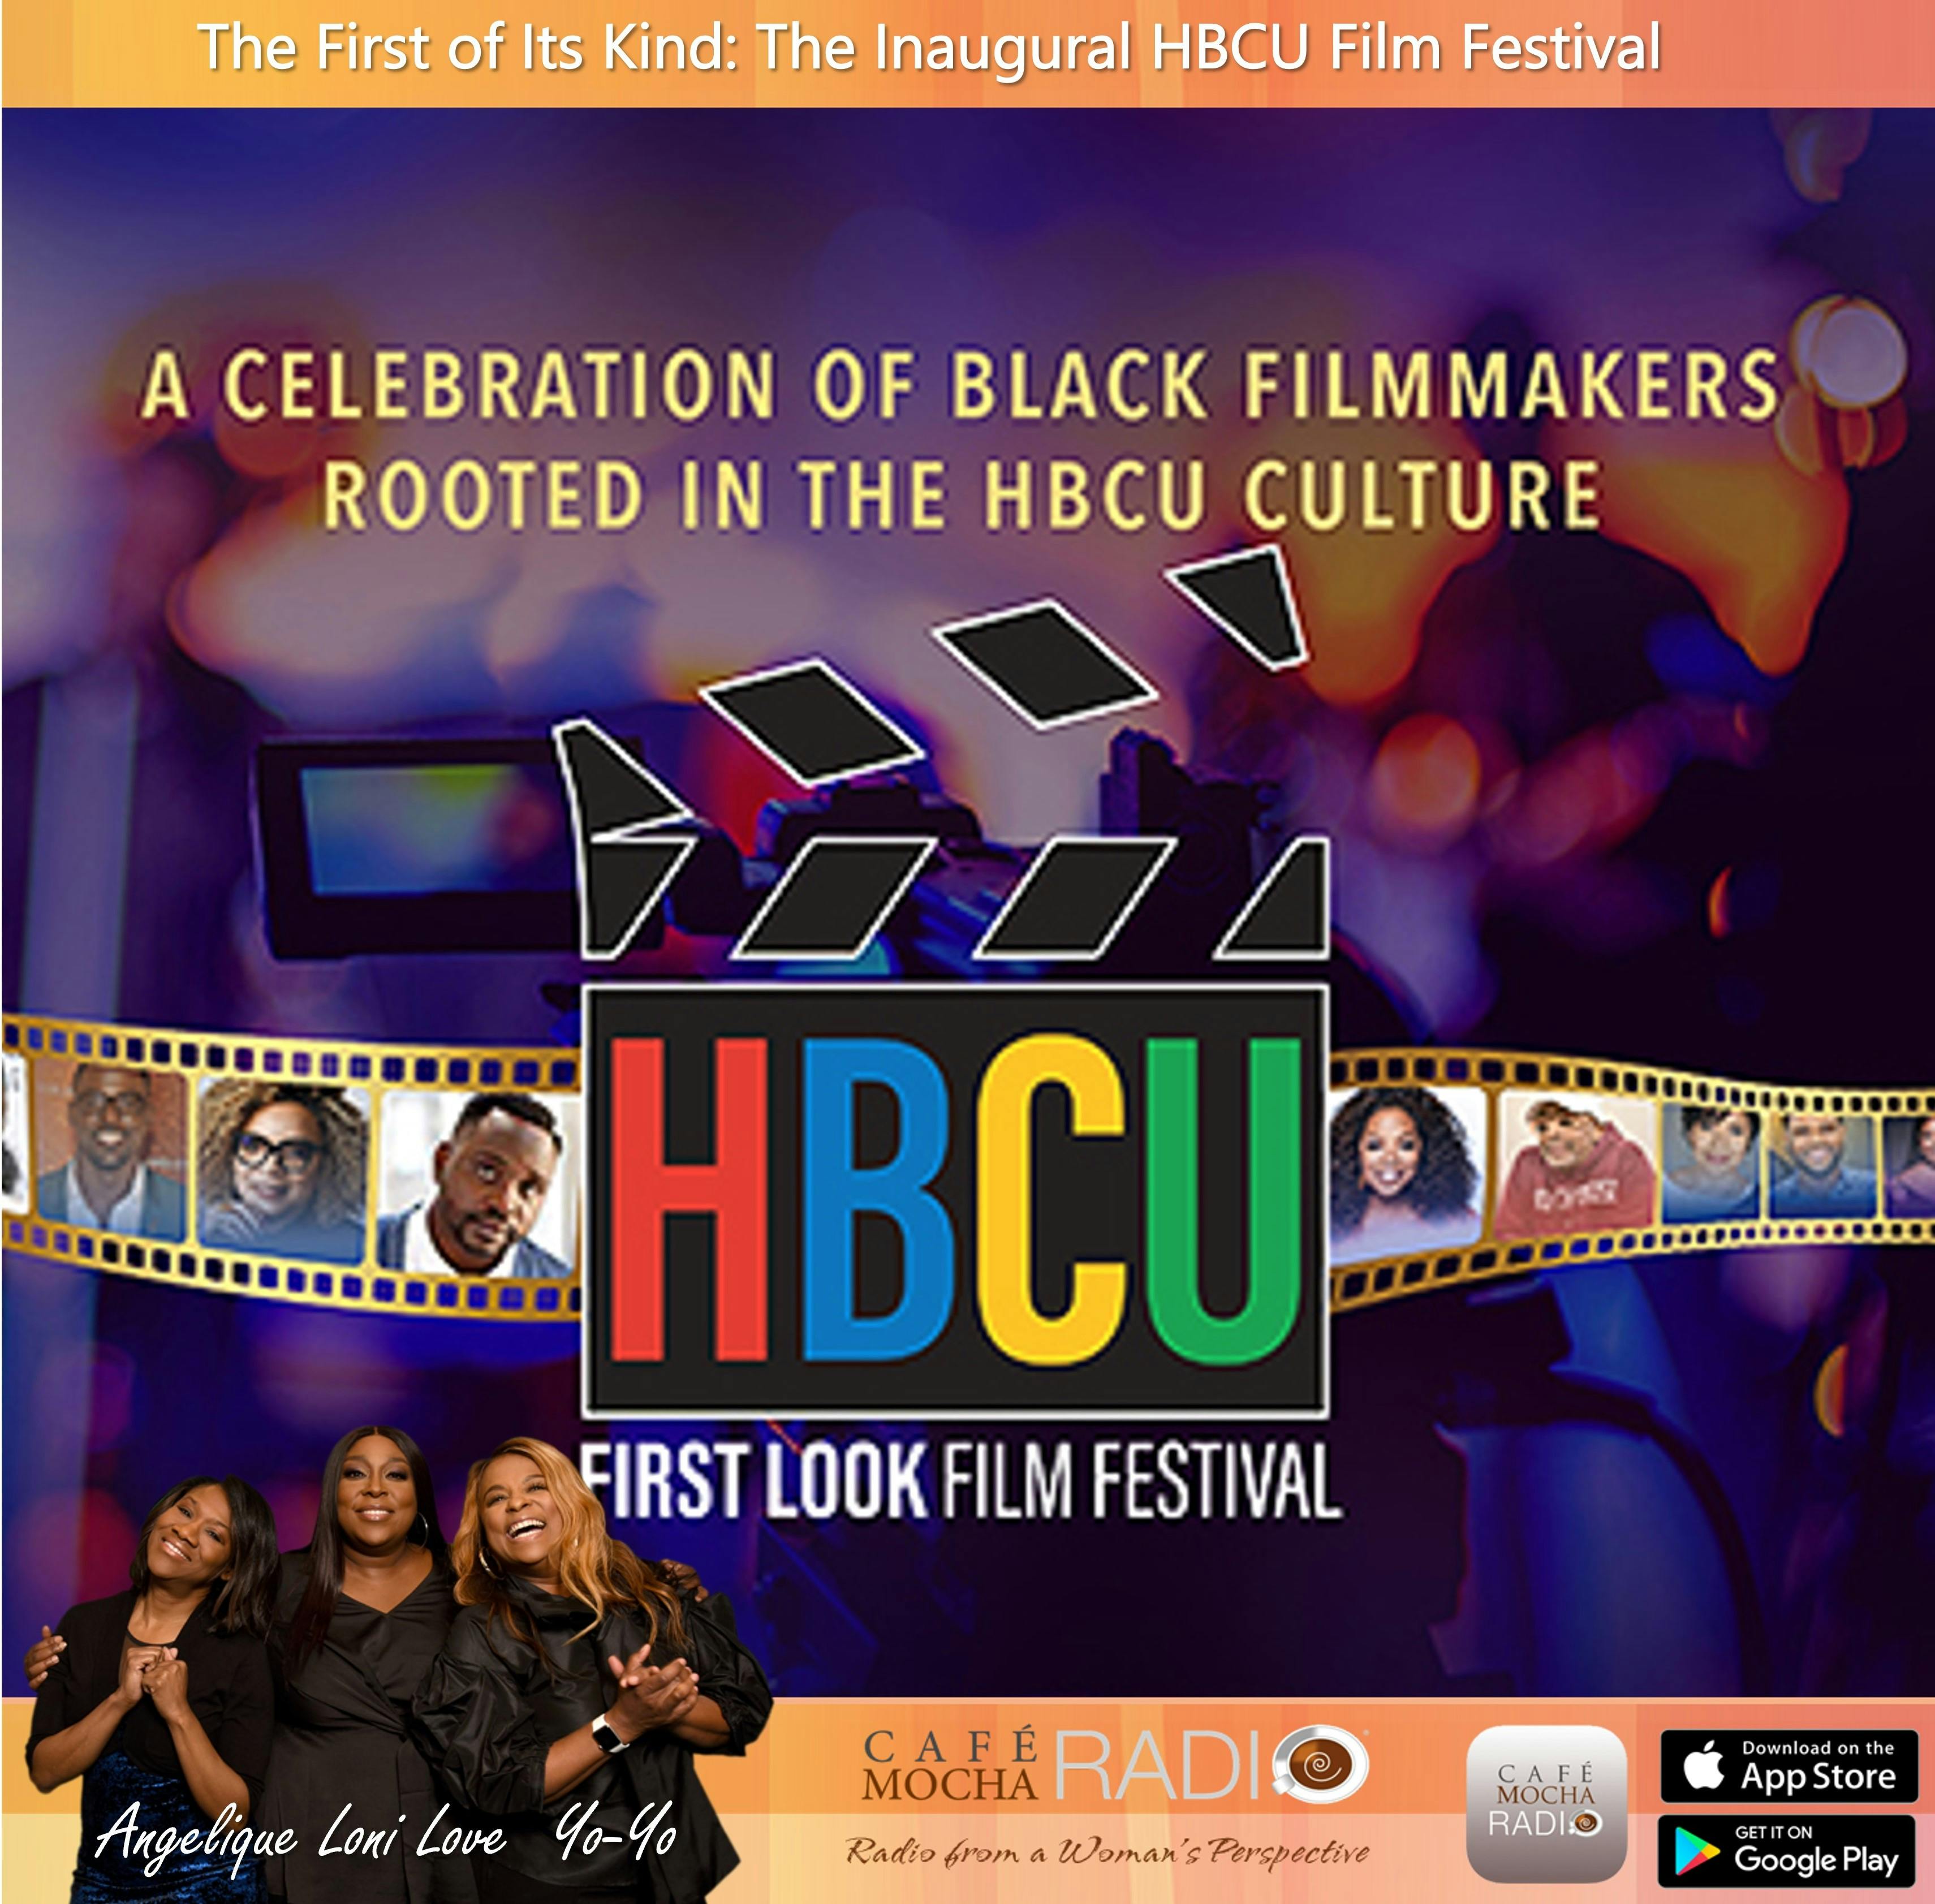 The First of Its Kind: The Inaugural HBCU Film Festival